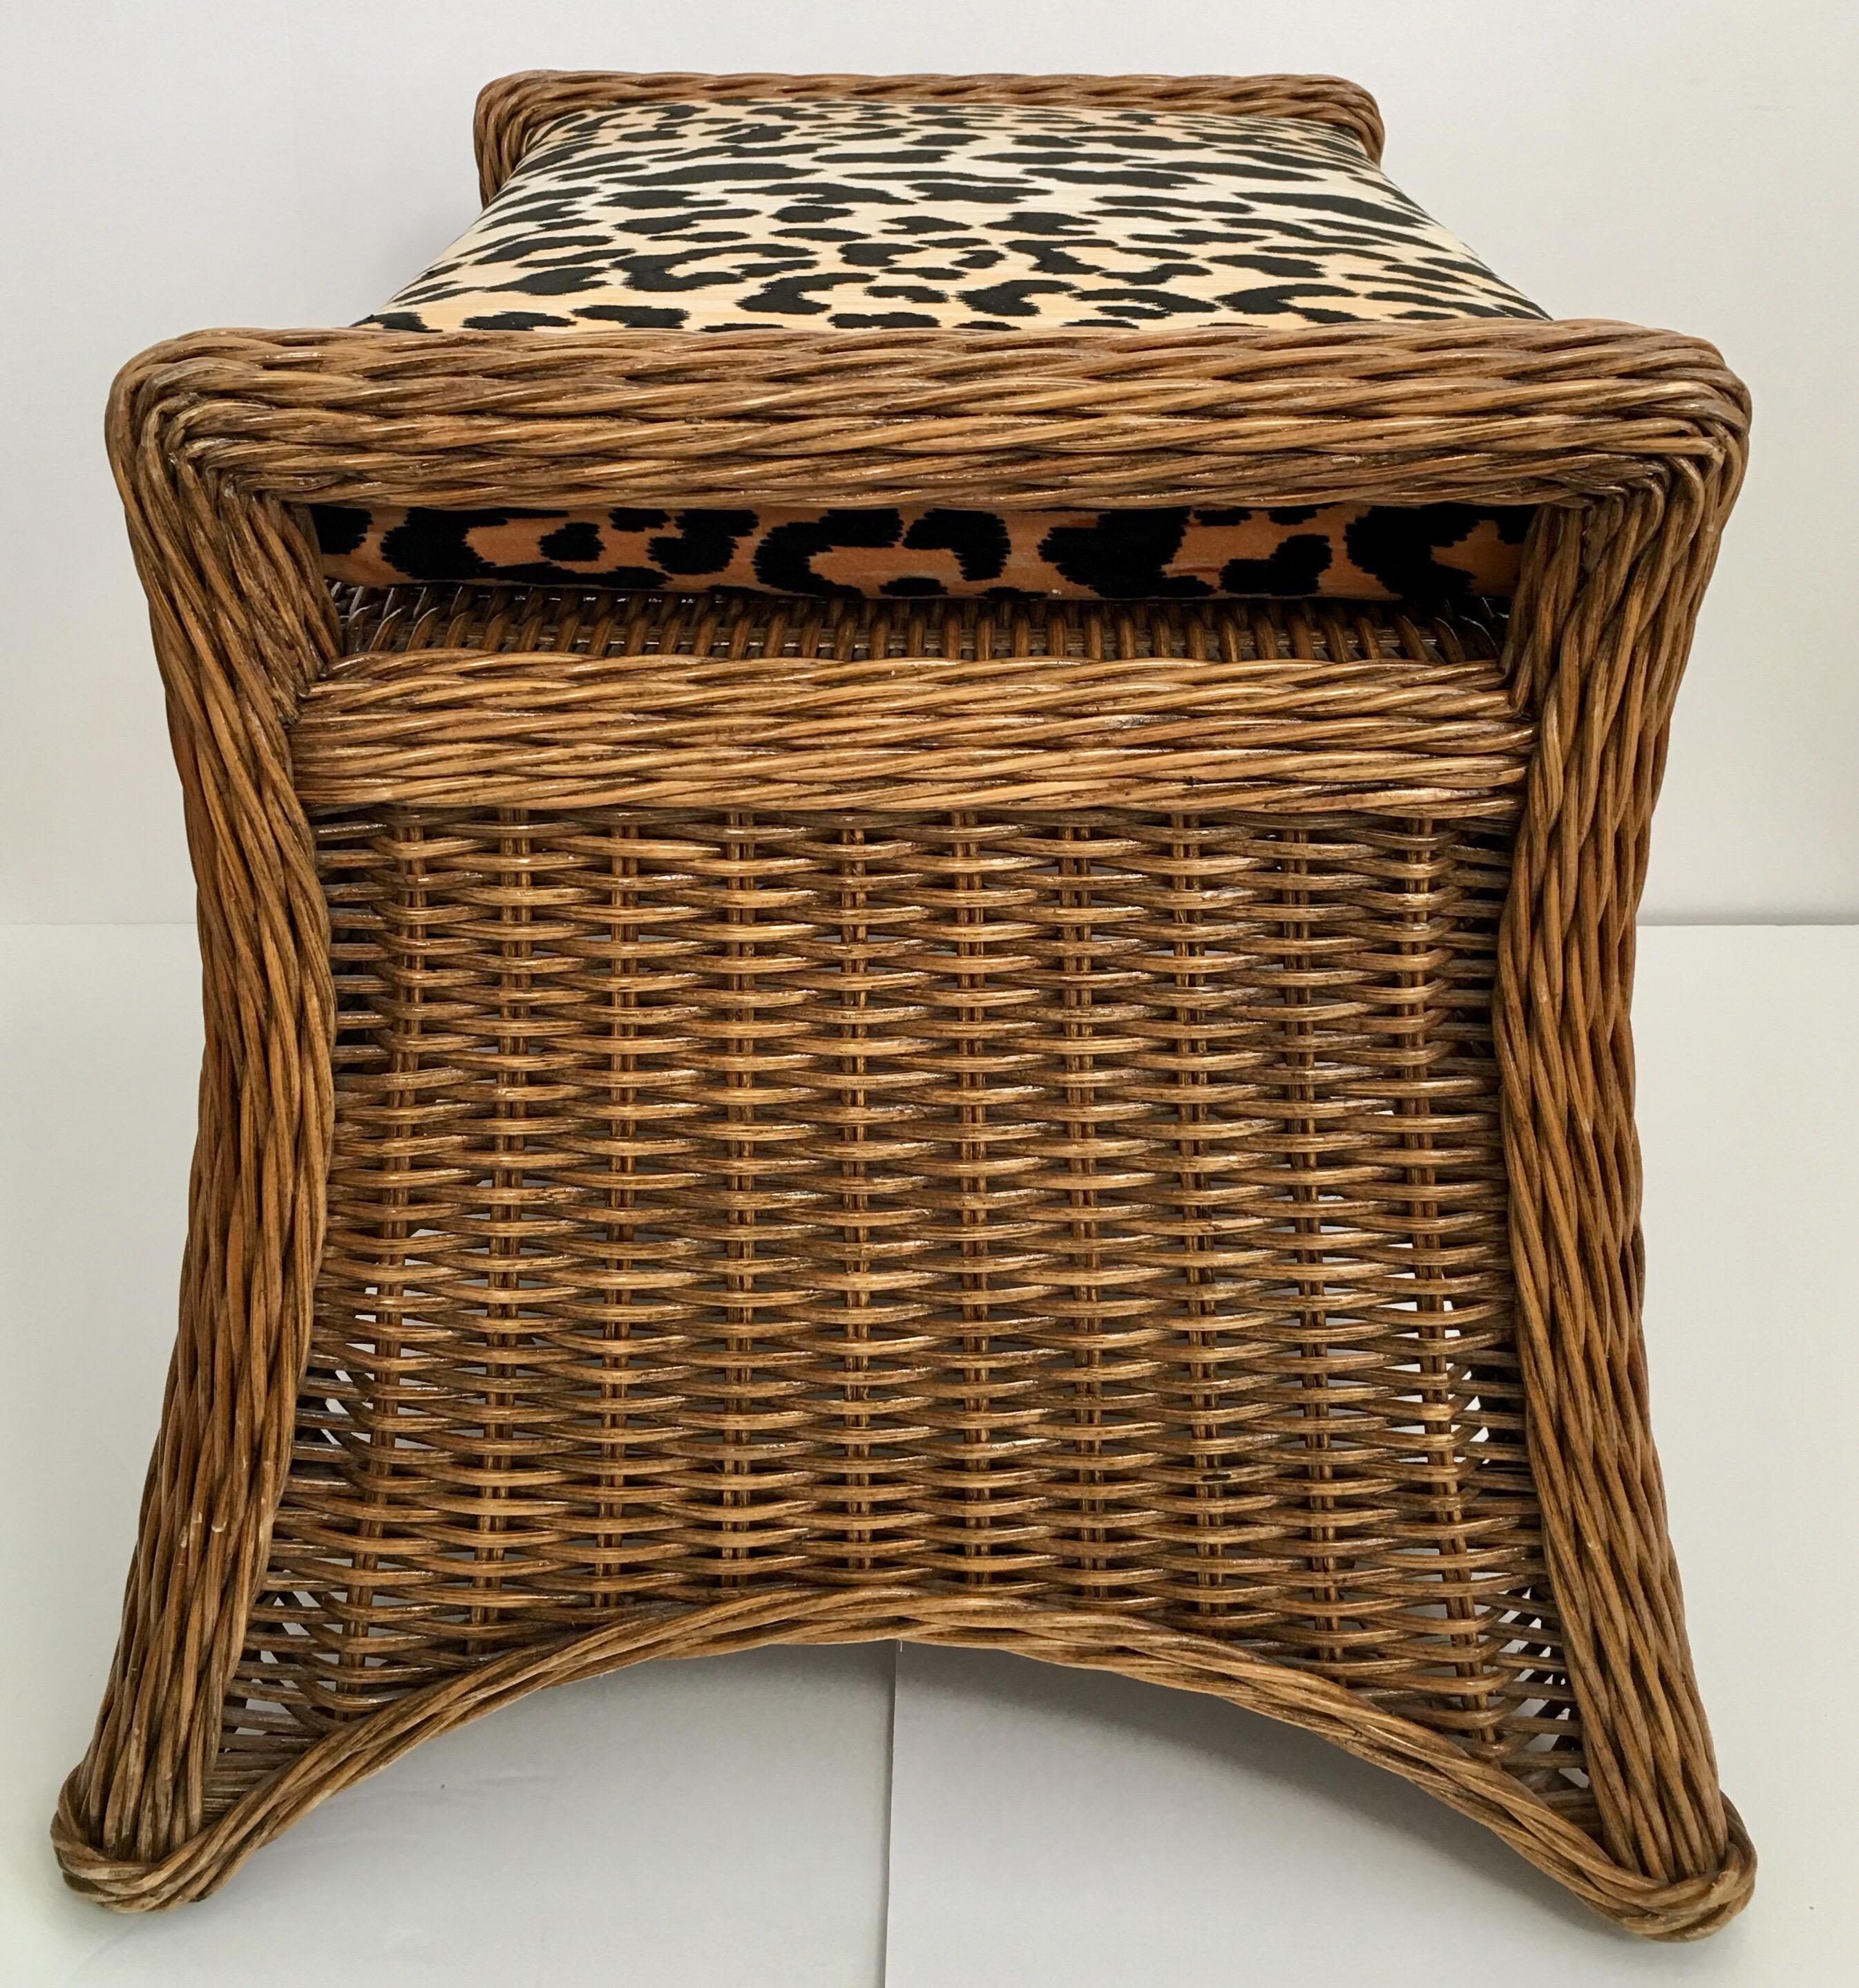 Hollywood Regency Sculptural Draped Wicker Bench with Animal Print Cushion